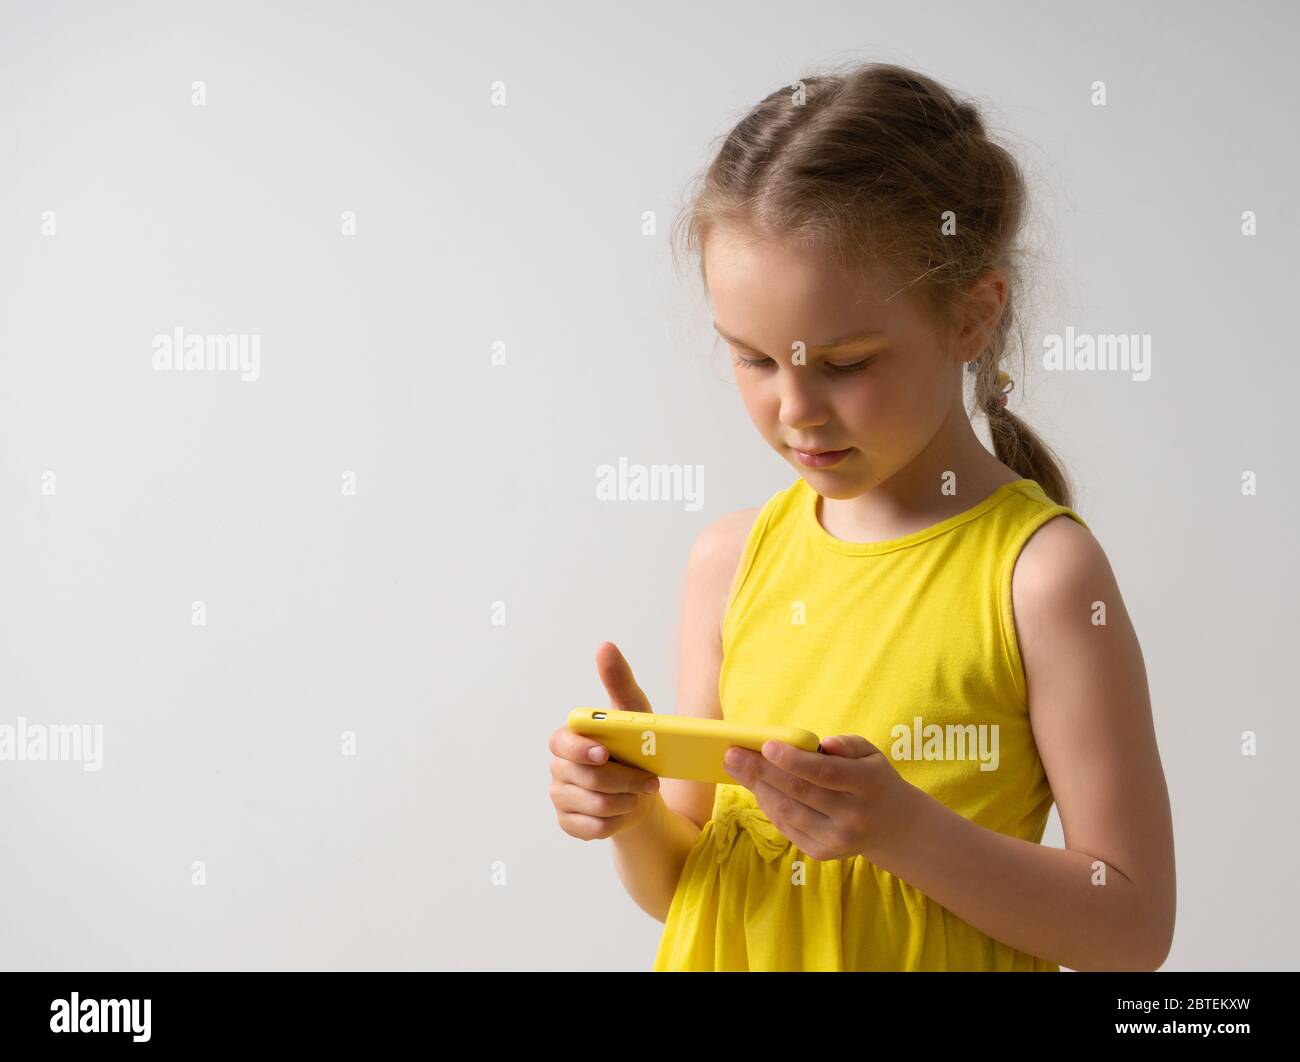 Lovely little girl in bright sleeveless dress with cute pigtail enjoys using her stylish smartpthone. Close up studio portrait isolated on white Stock Photo